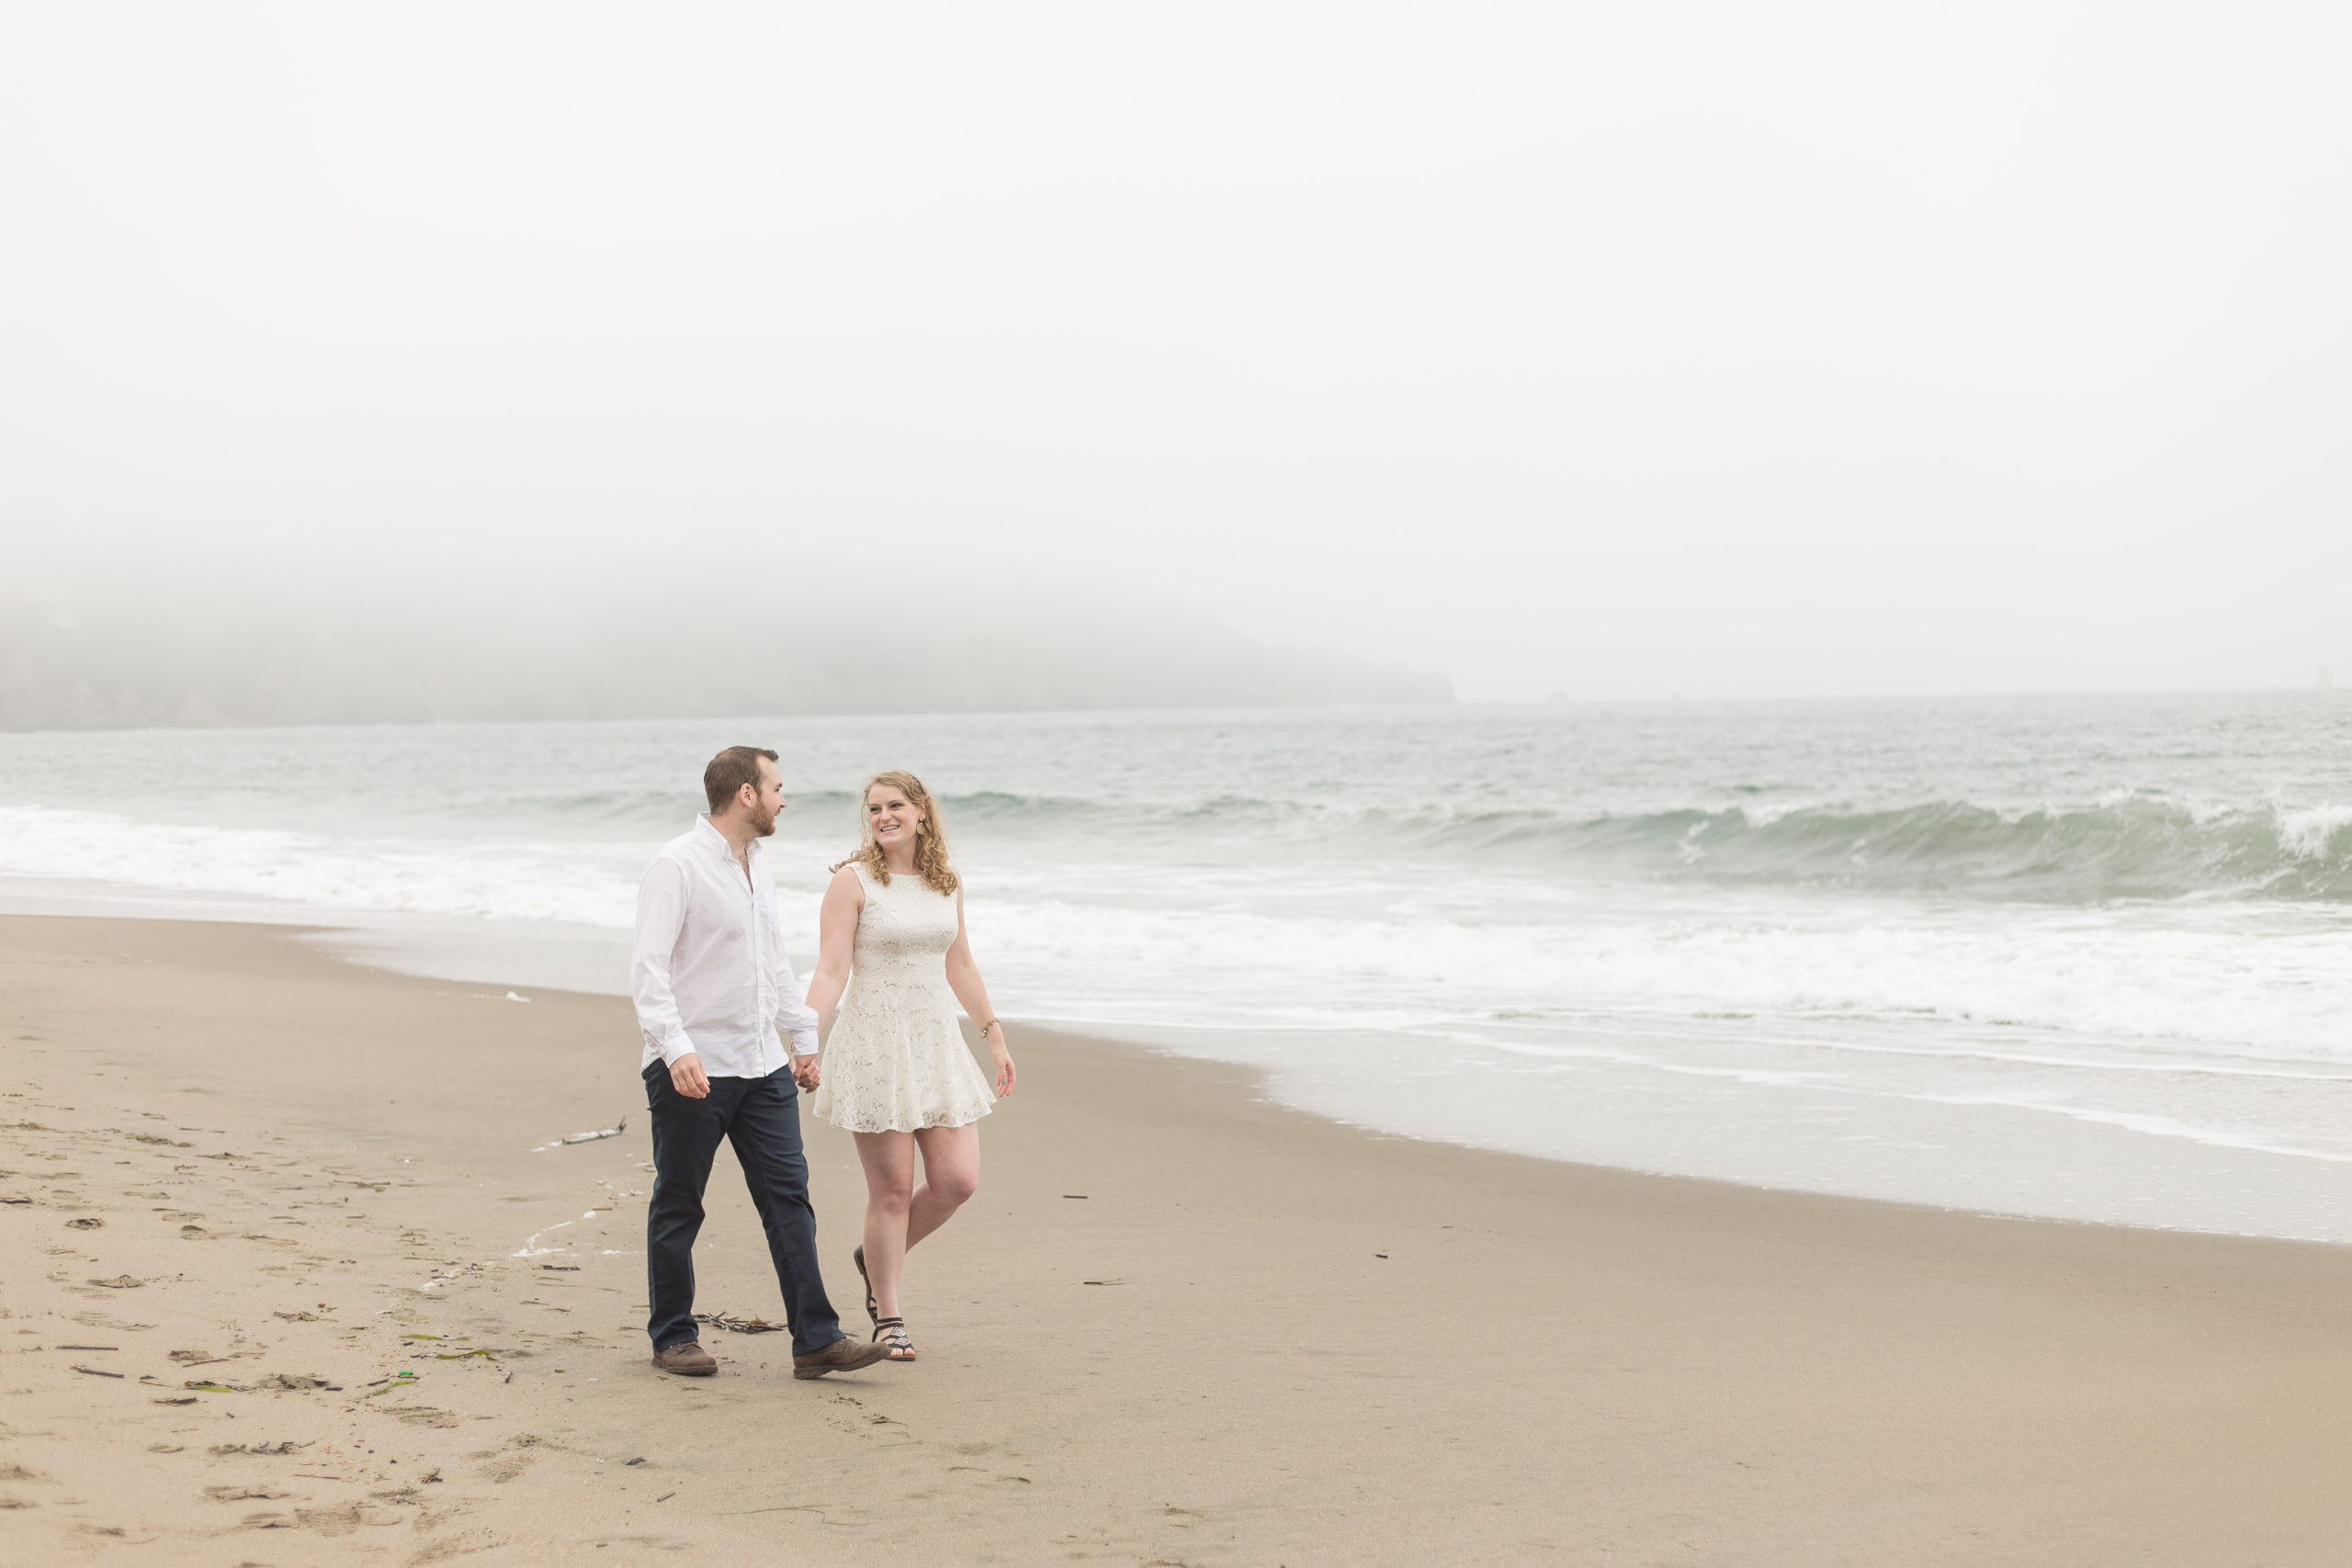 Husband and wife walking on the foggy beach in formal clothes